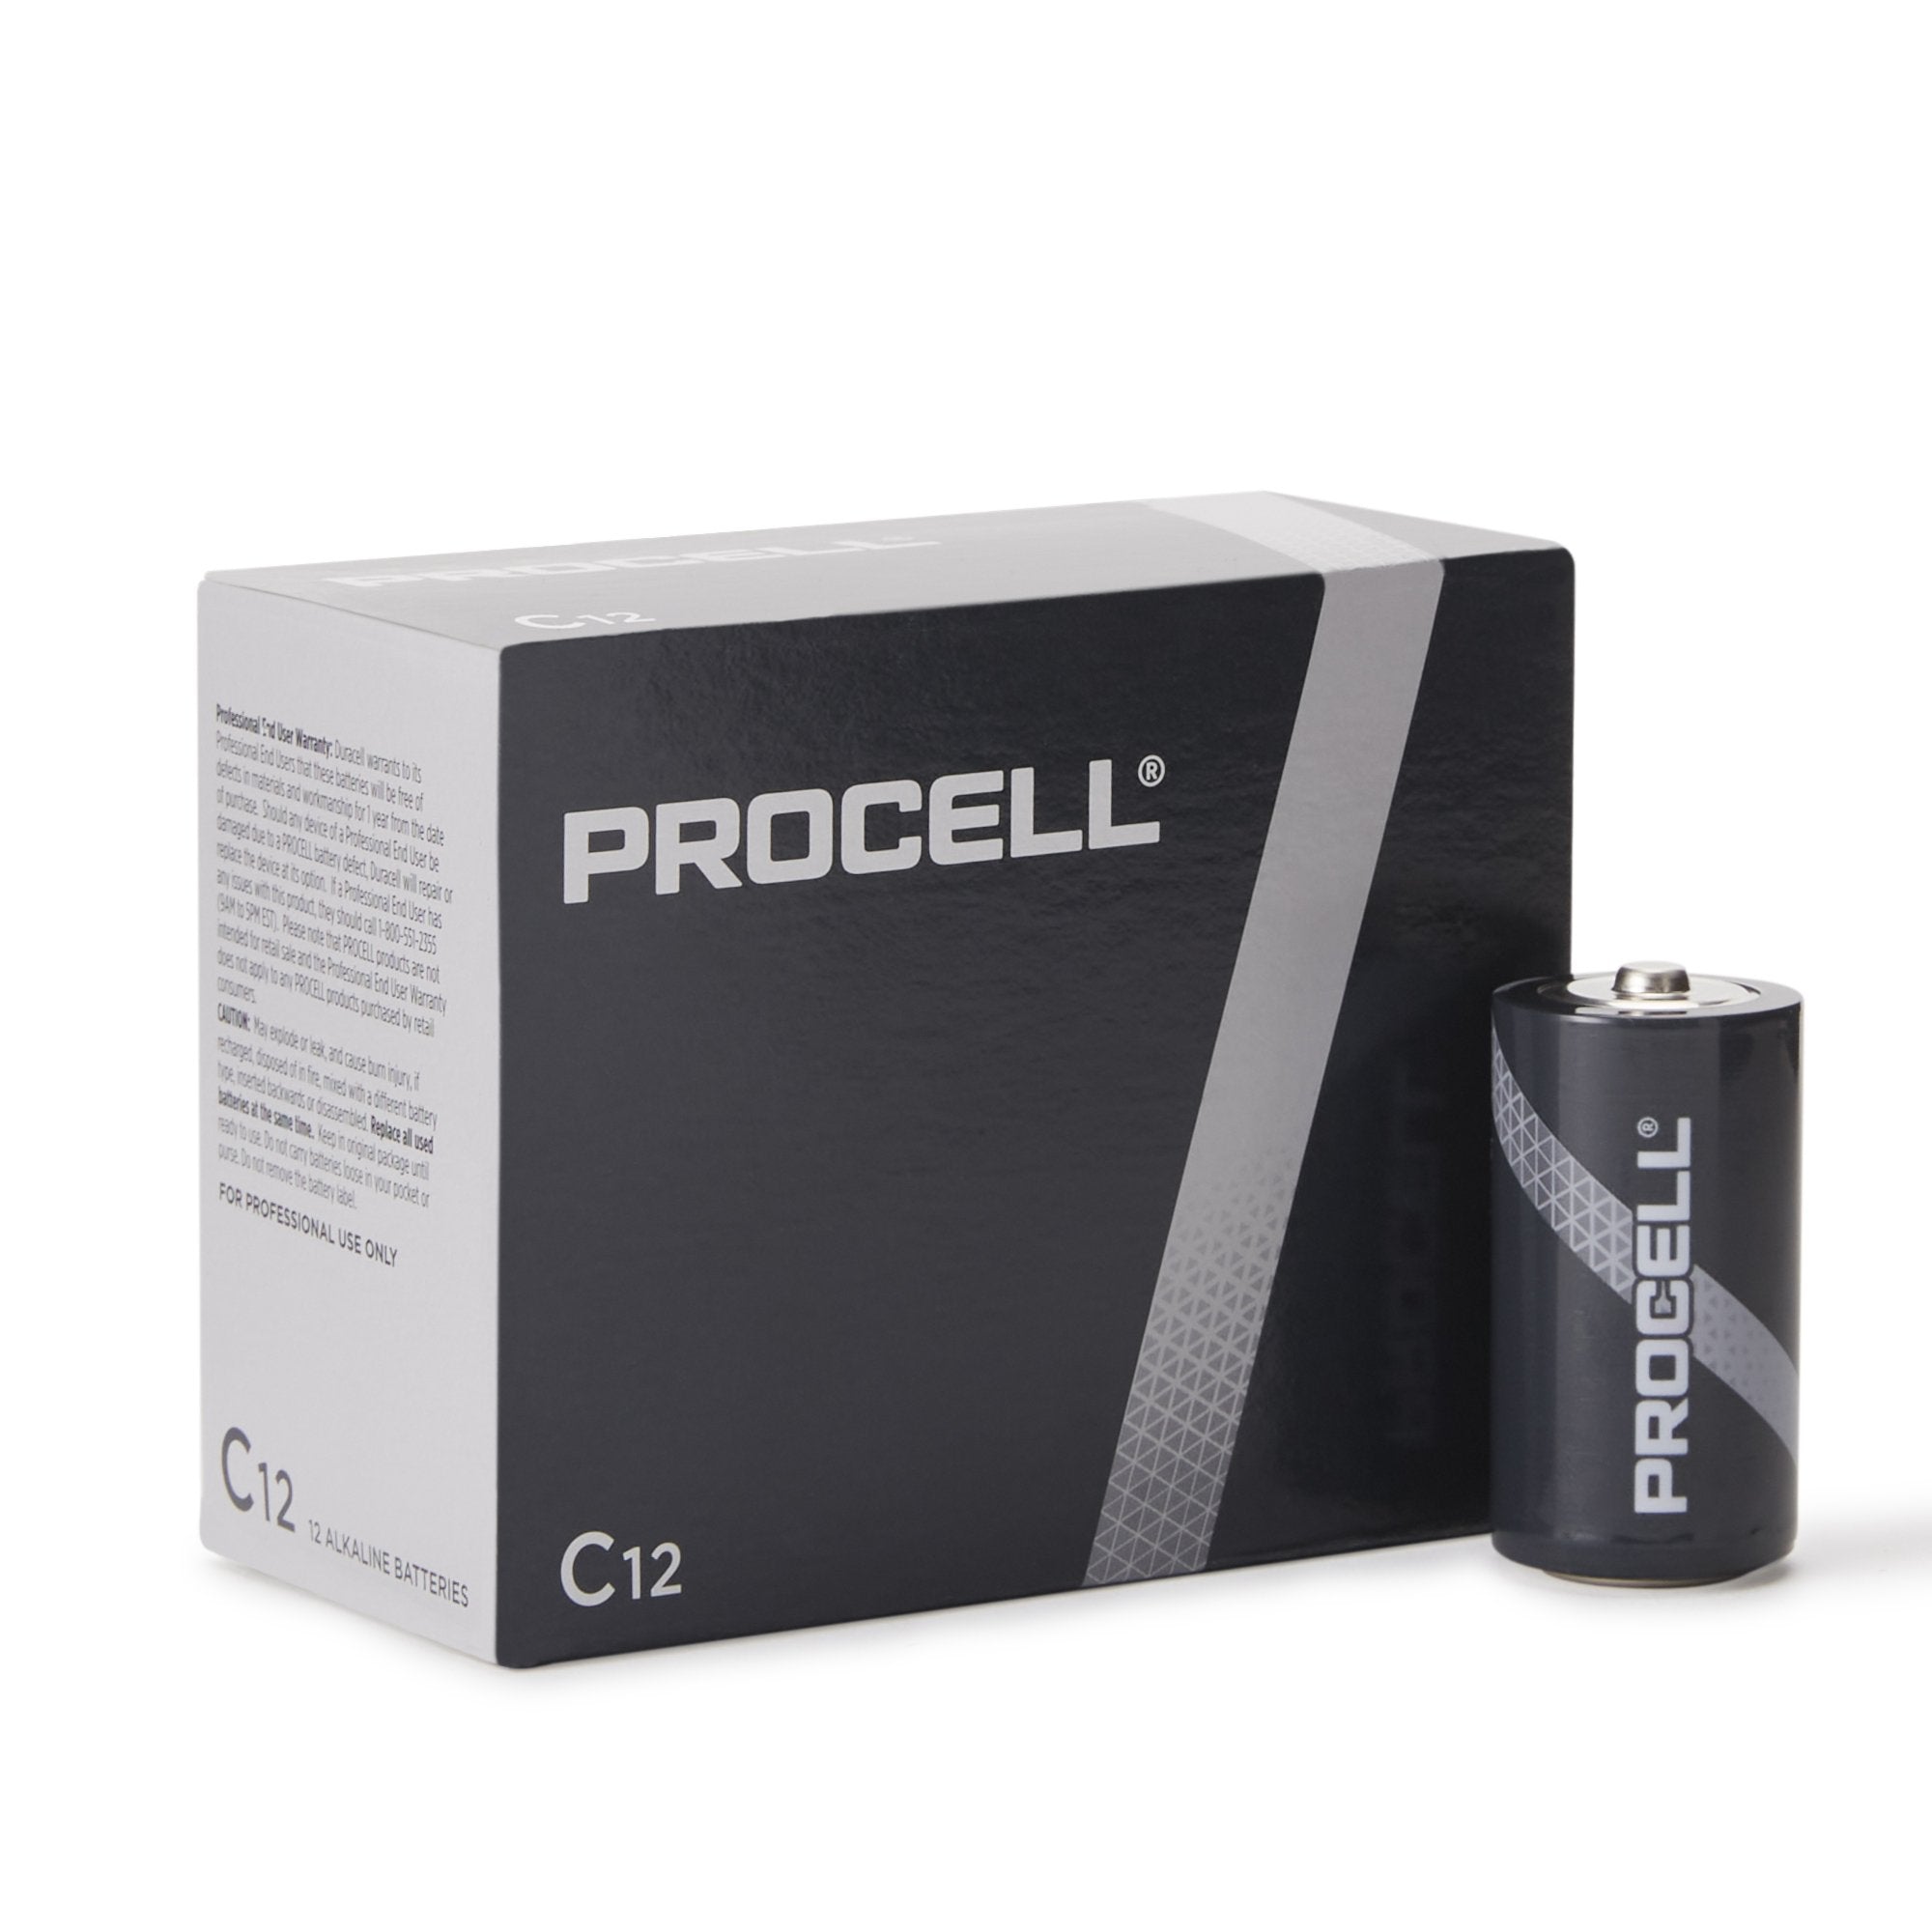 Duracell® Procell® C Cell Disposable Alkaline Battery